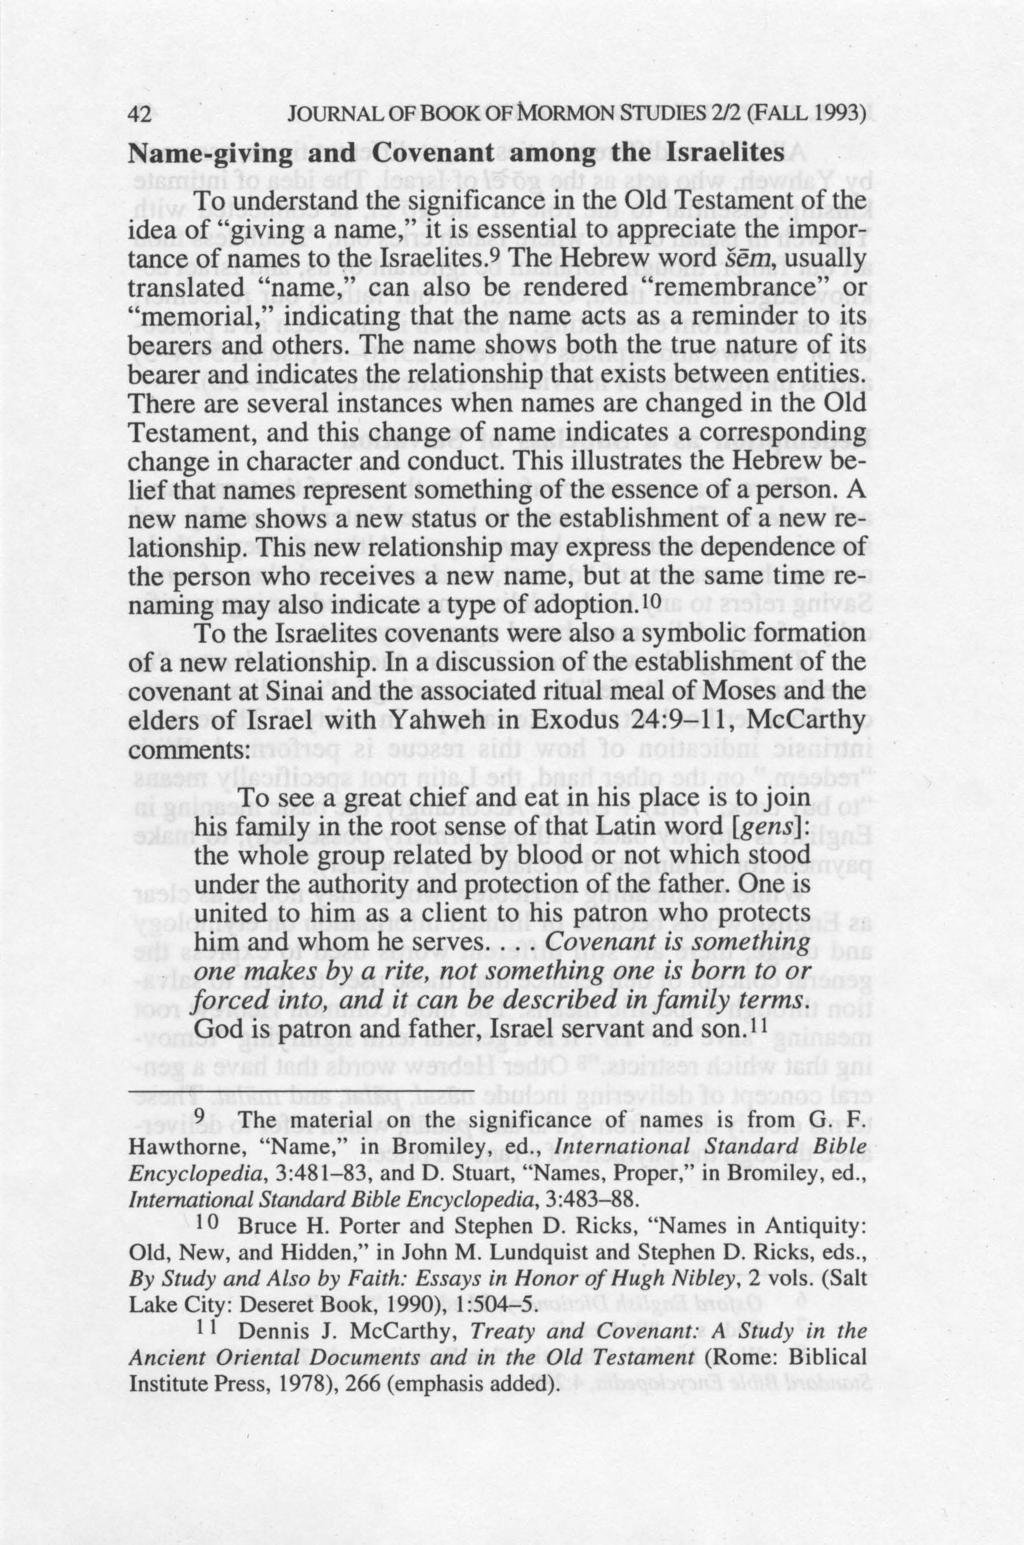 42 JOURNAL OF BOOK OF MORMON STUDIES 212 (FALL 1993) Name-giving and Covenant among the Israelites To understand the significance in the Old Testament of the idea of "giving a name," it is essential